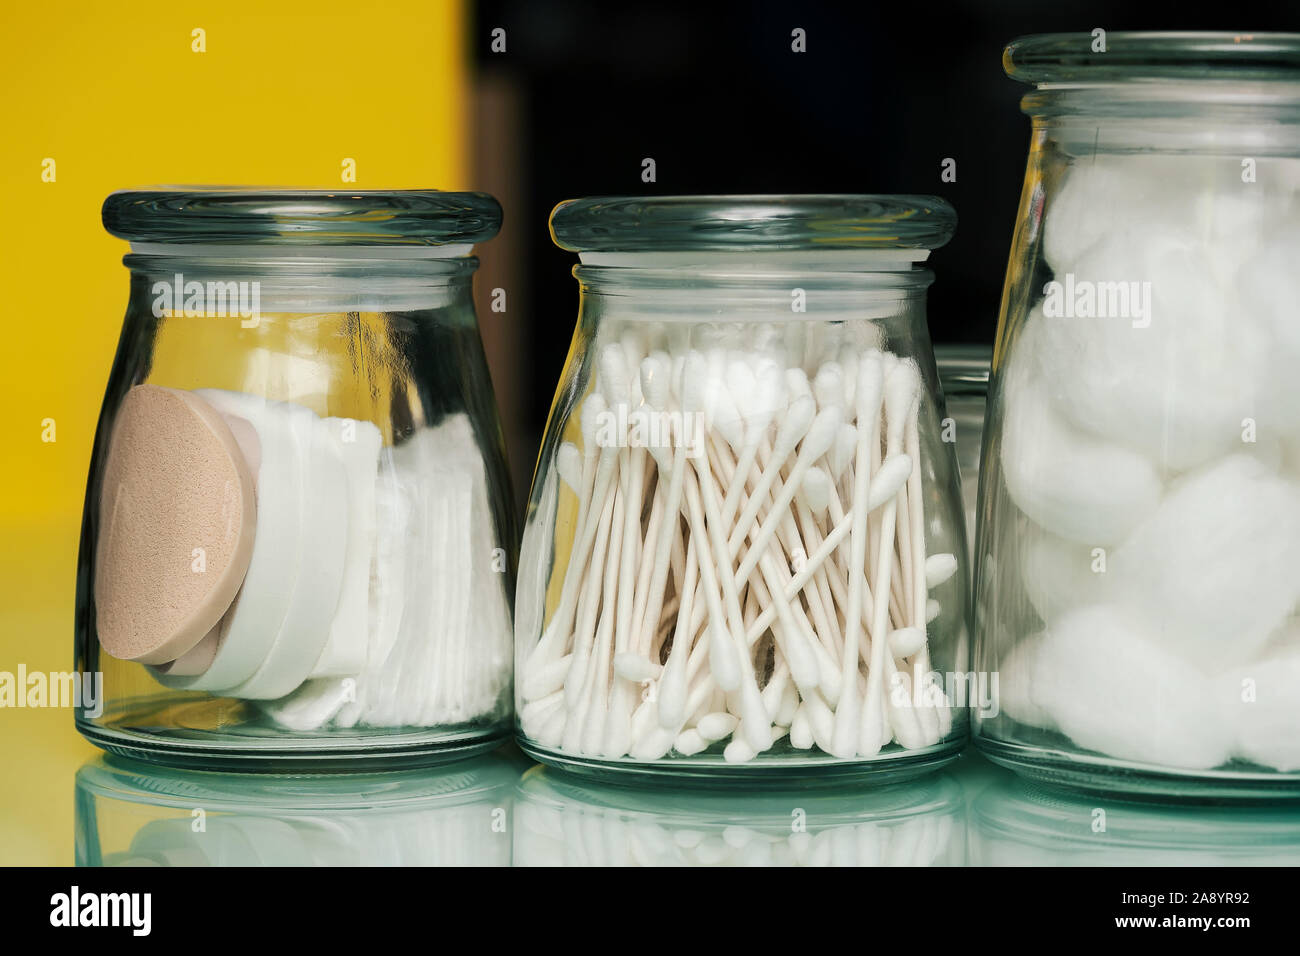 Sterile glass jars to store bathroom accessories like, makeup remover pads, cotton balls, and swabs. Stock Photo